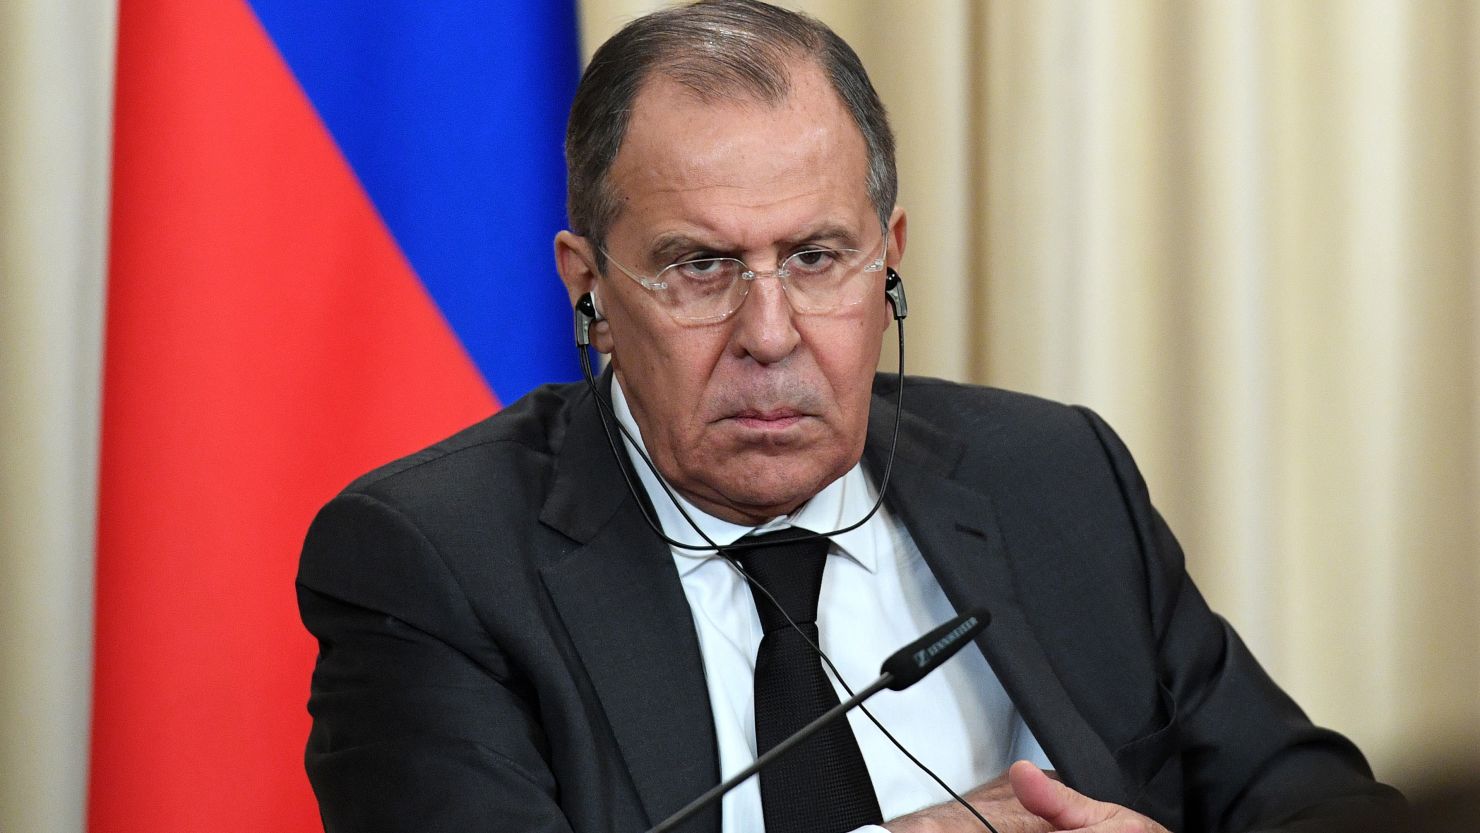 Lavrov was scathing about the Obama administration.